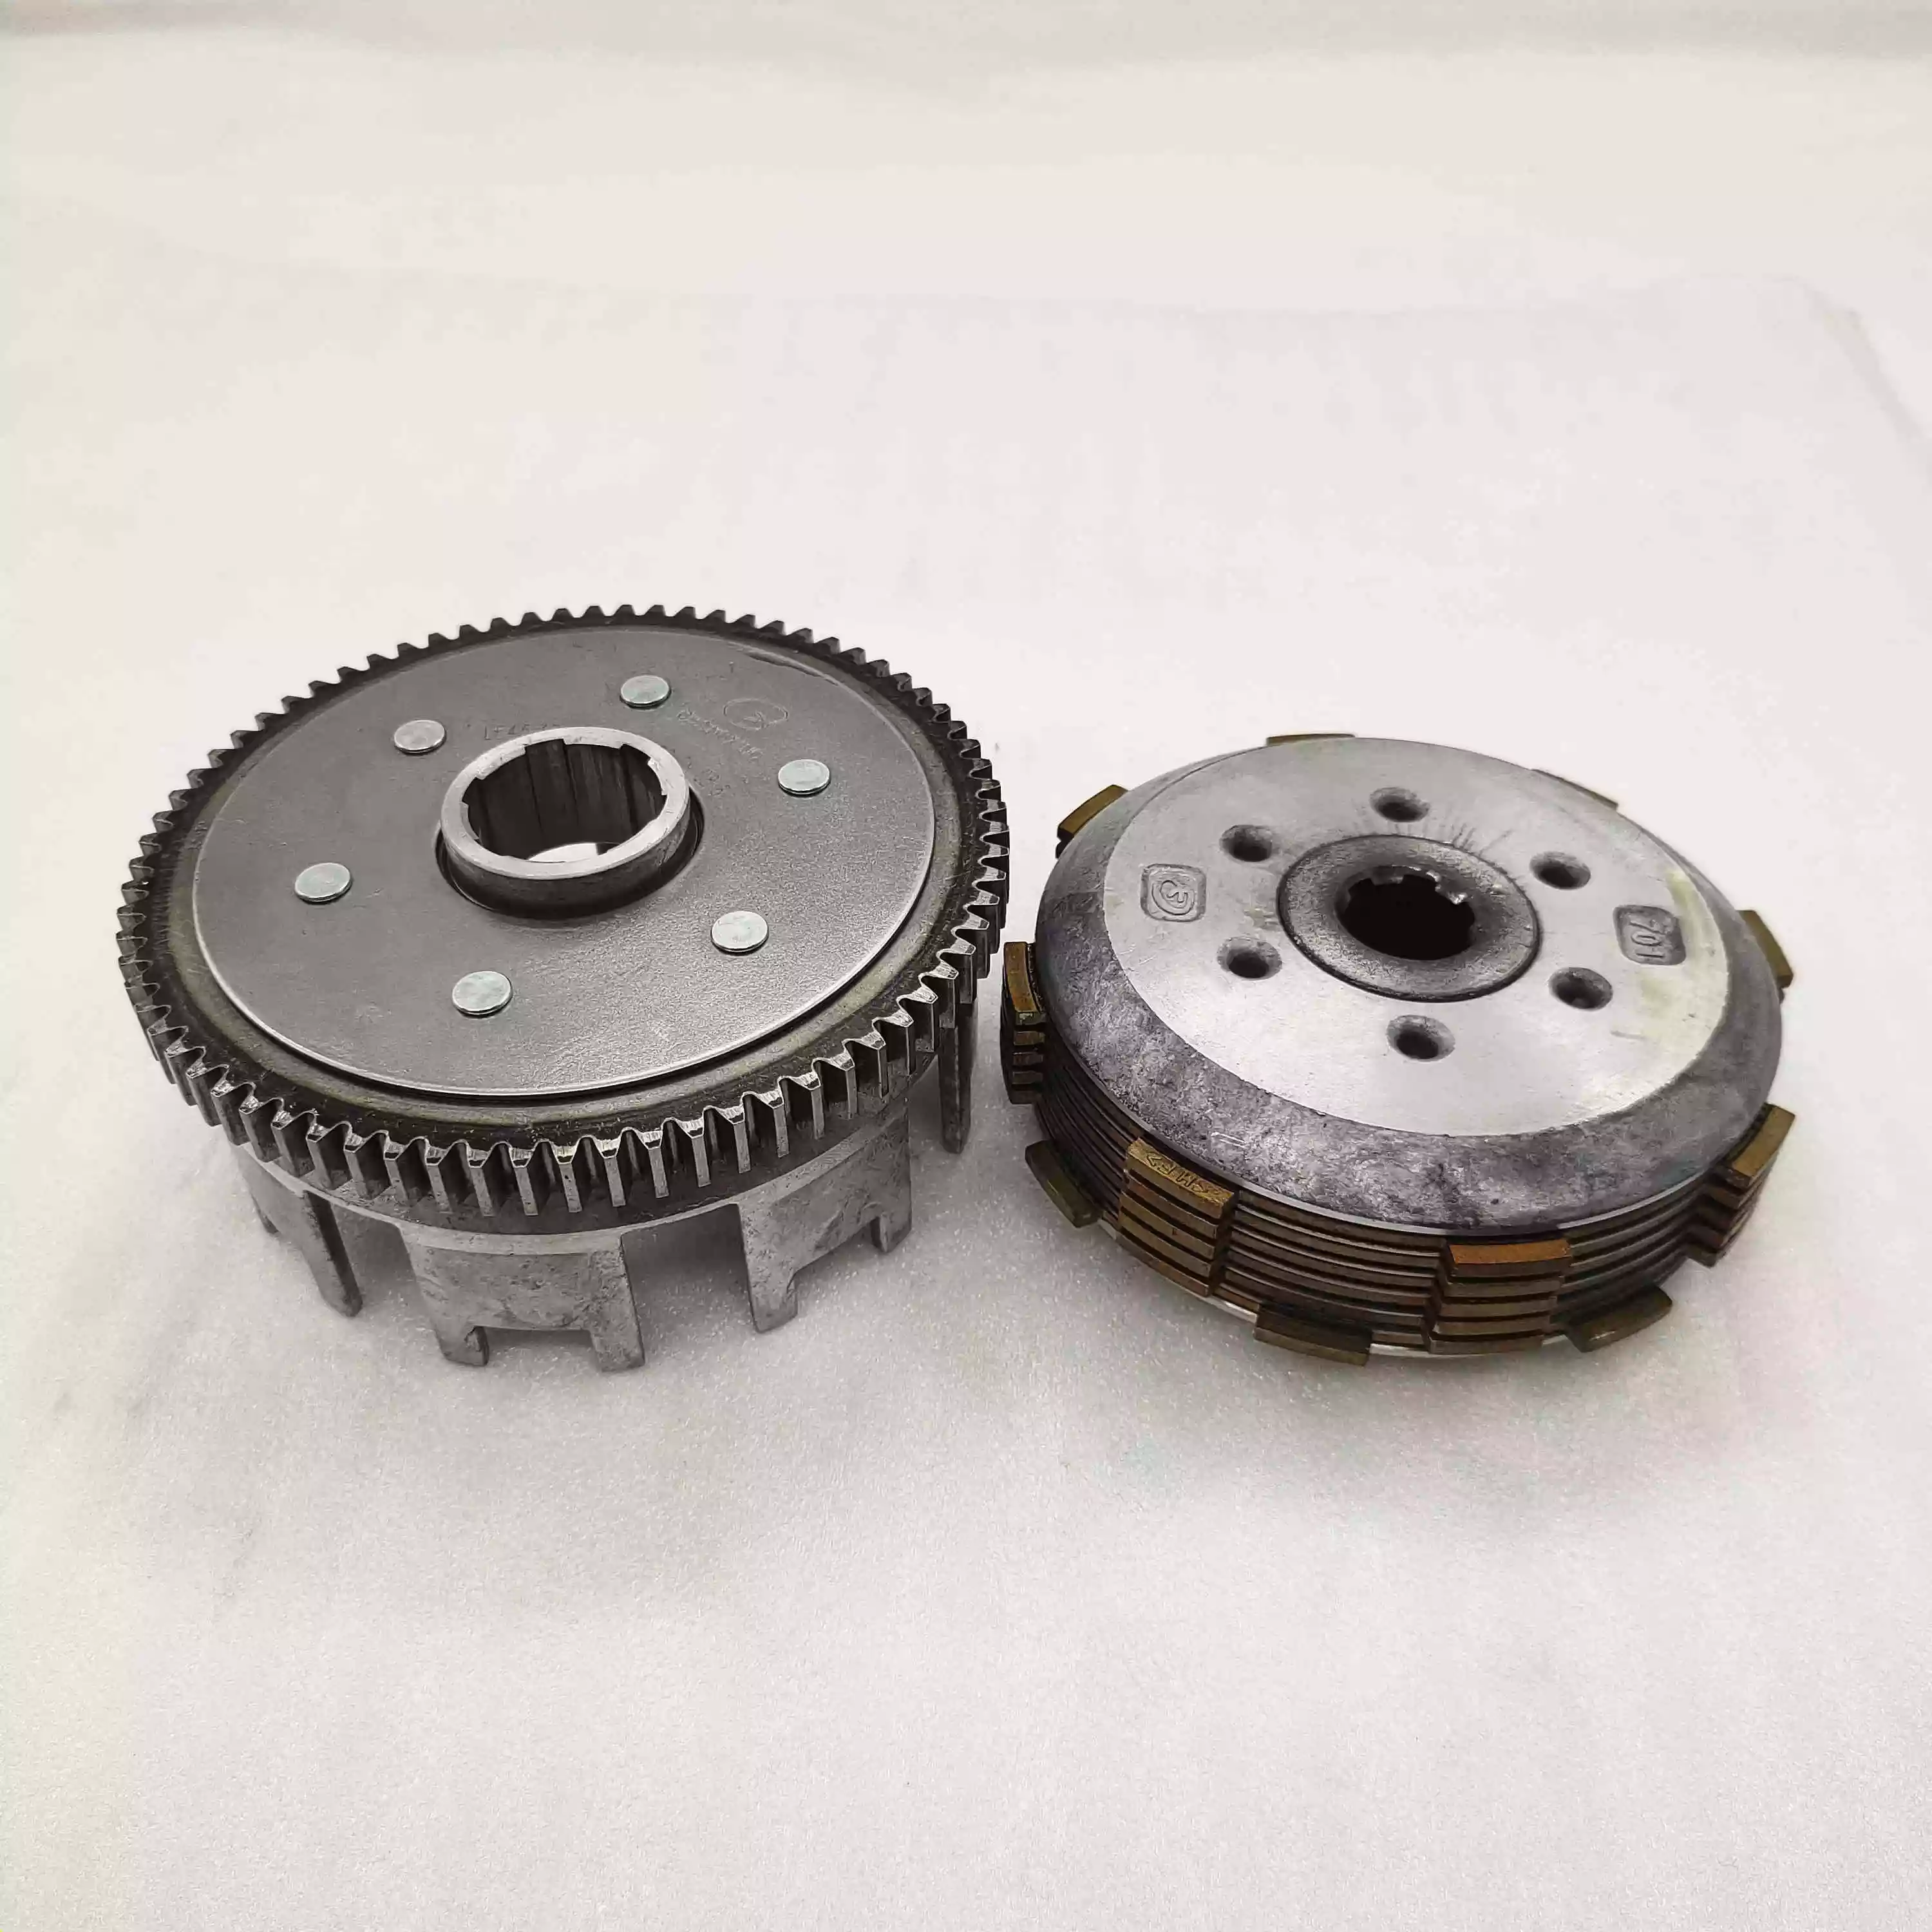 2021 Hot sale 150cc AIr-cooled engine assembly clutch for selling Clutch plate disc clutch assembly Auto parts truck parts